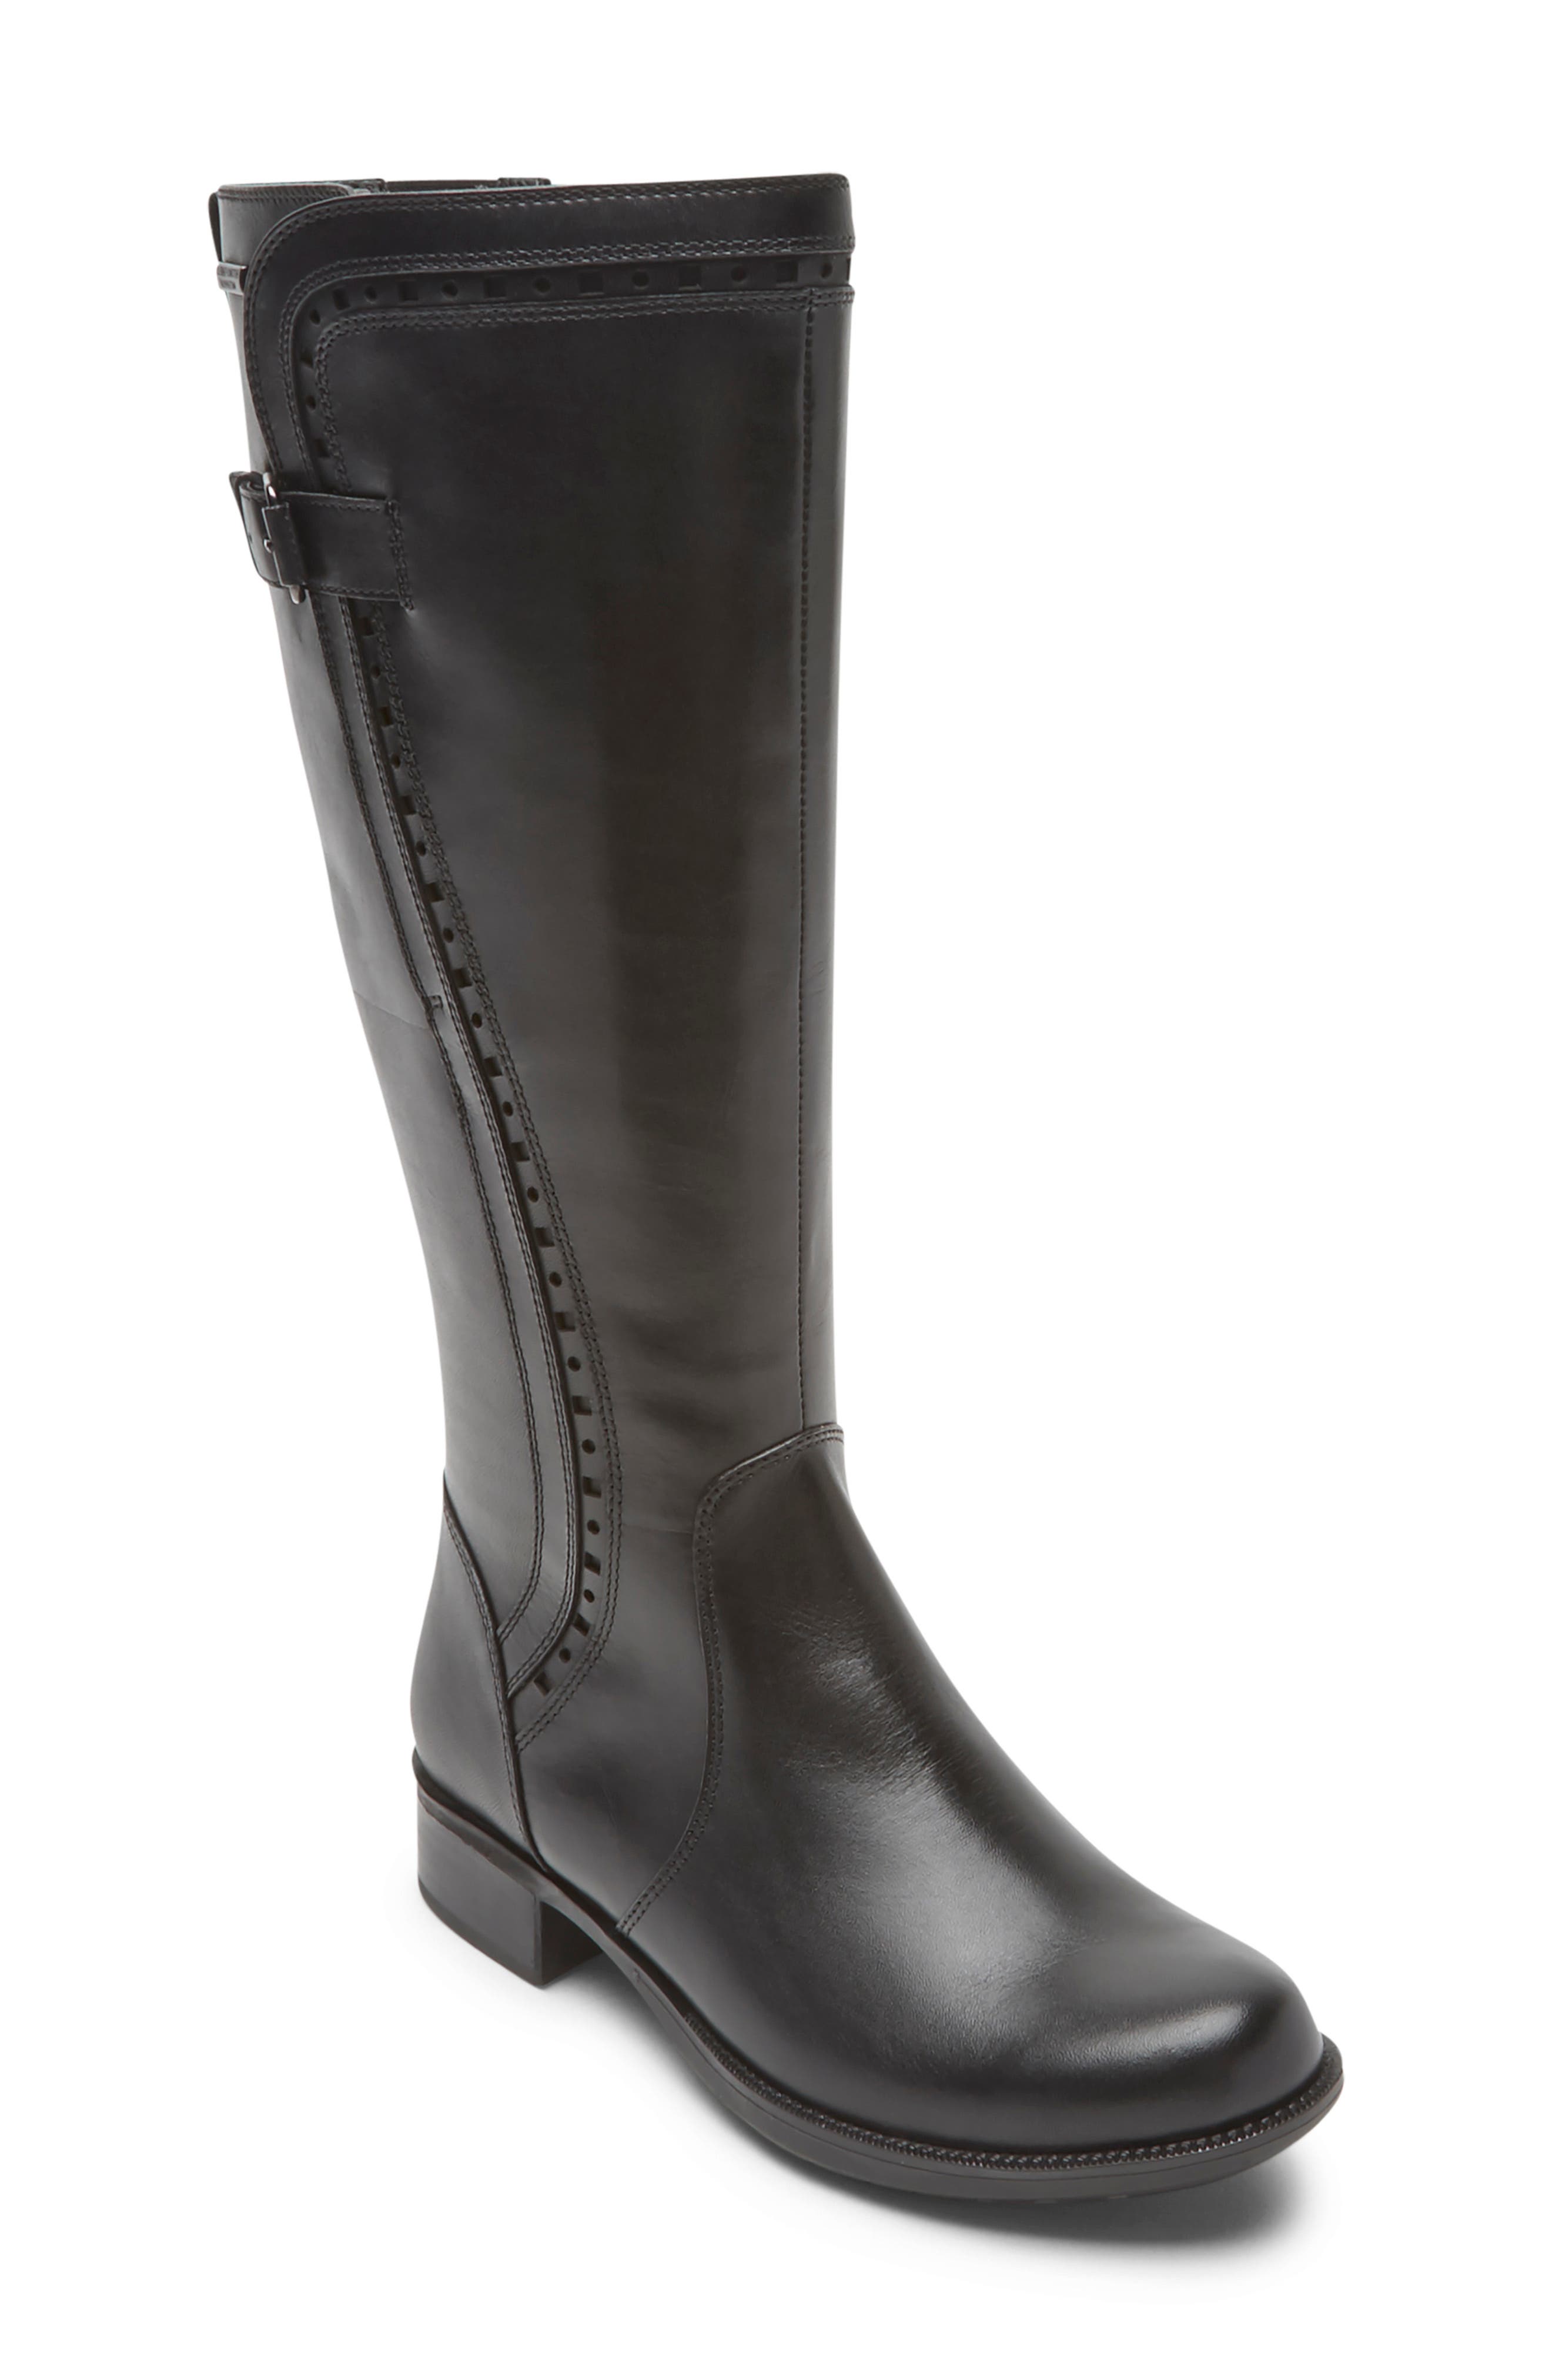 rockport boots womens